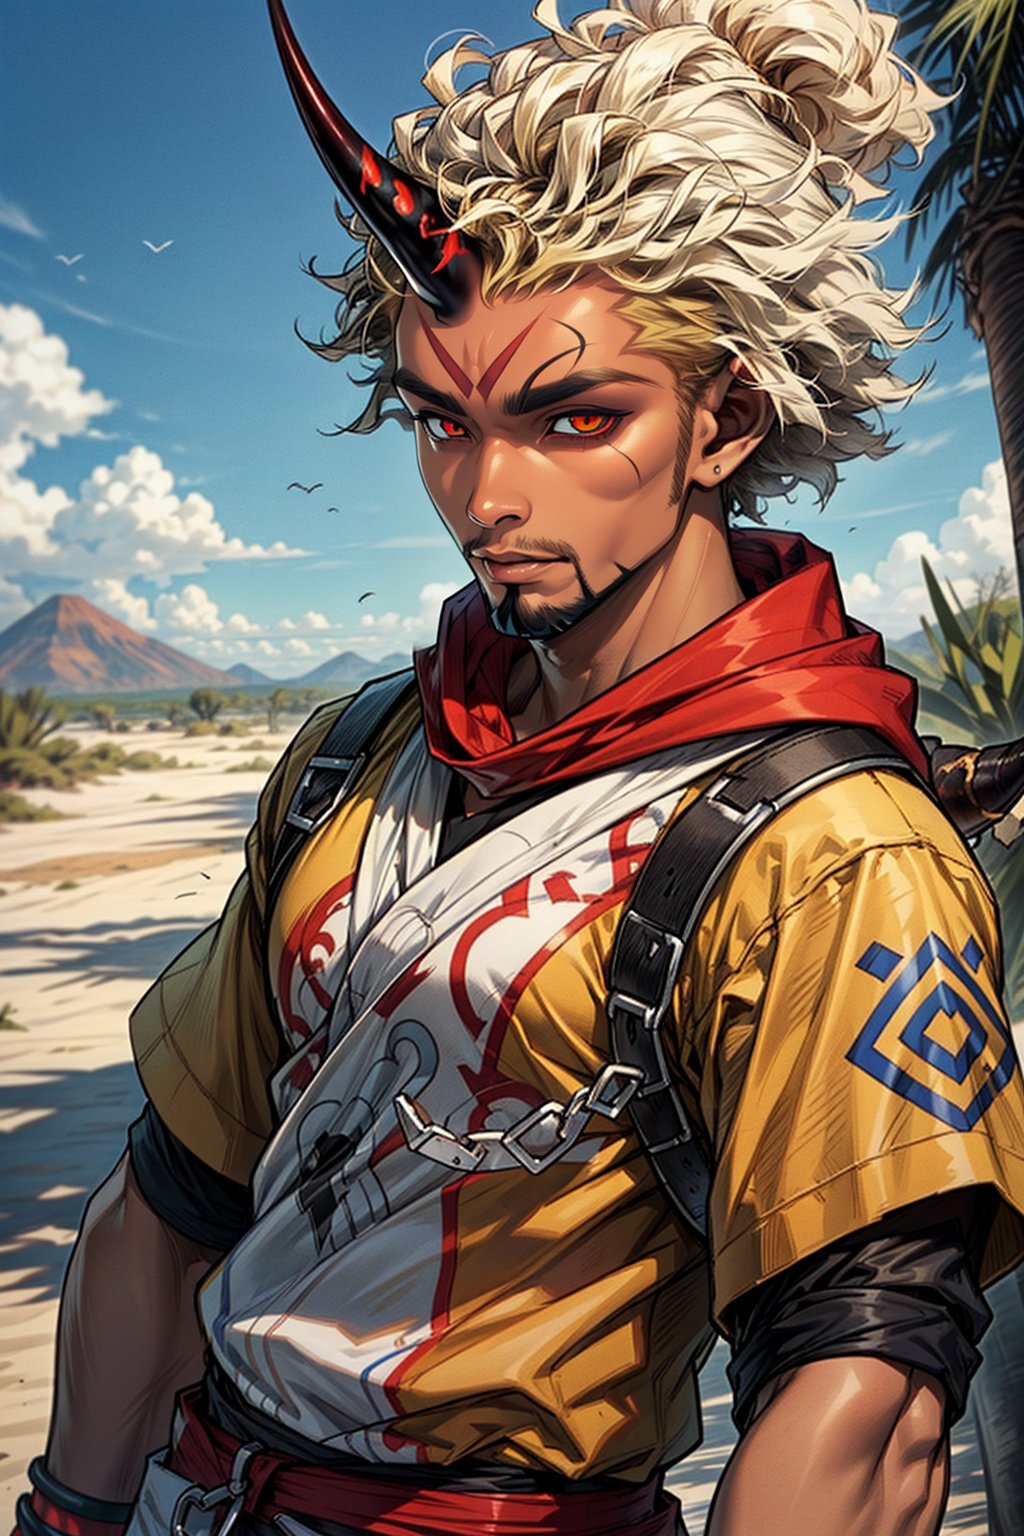 (((2 demon horn on the forehead))), (incredibly big afro hairstyle), african male , half human, brown beard, ((blond hair)), snake-tail, ((held of African tribe)), african clothes, old man, adult, male, (dark skin tone), scarf with a hood, desert in the background, dynamic pose, dynamic view
,red \(pokemon\)